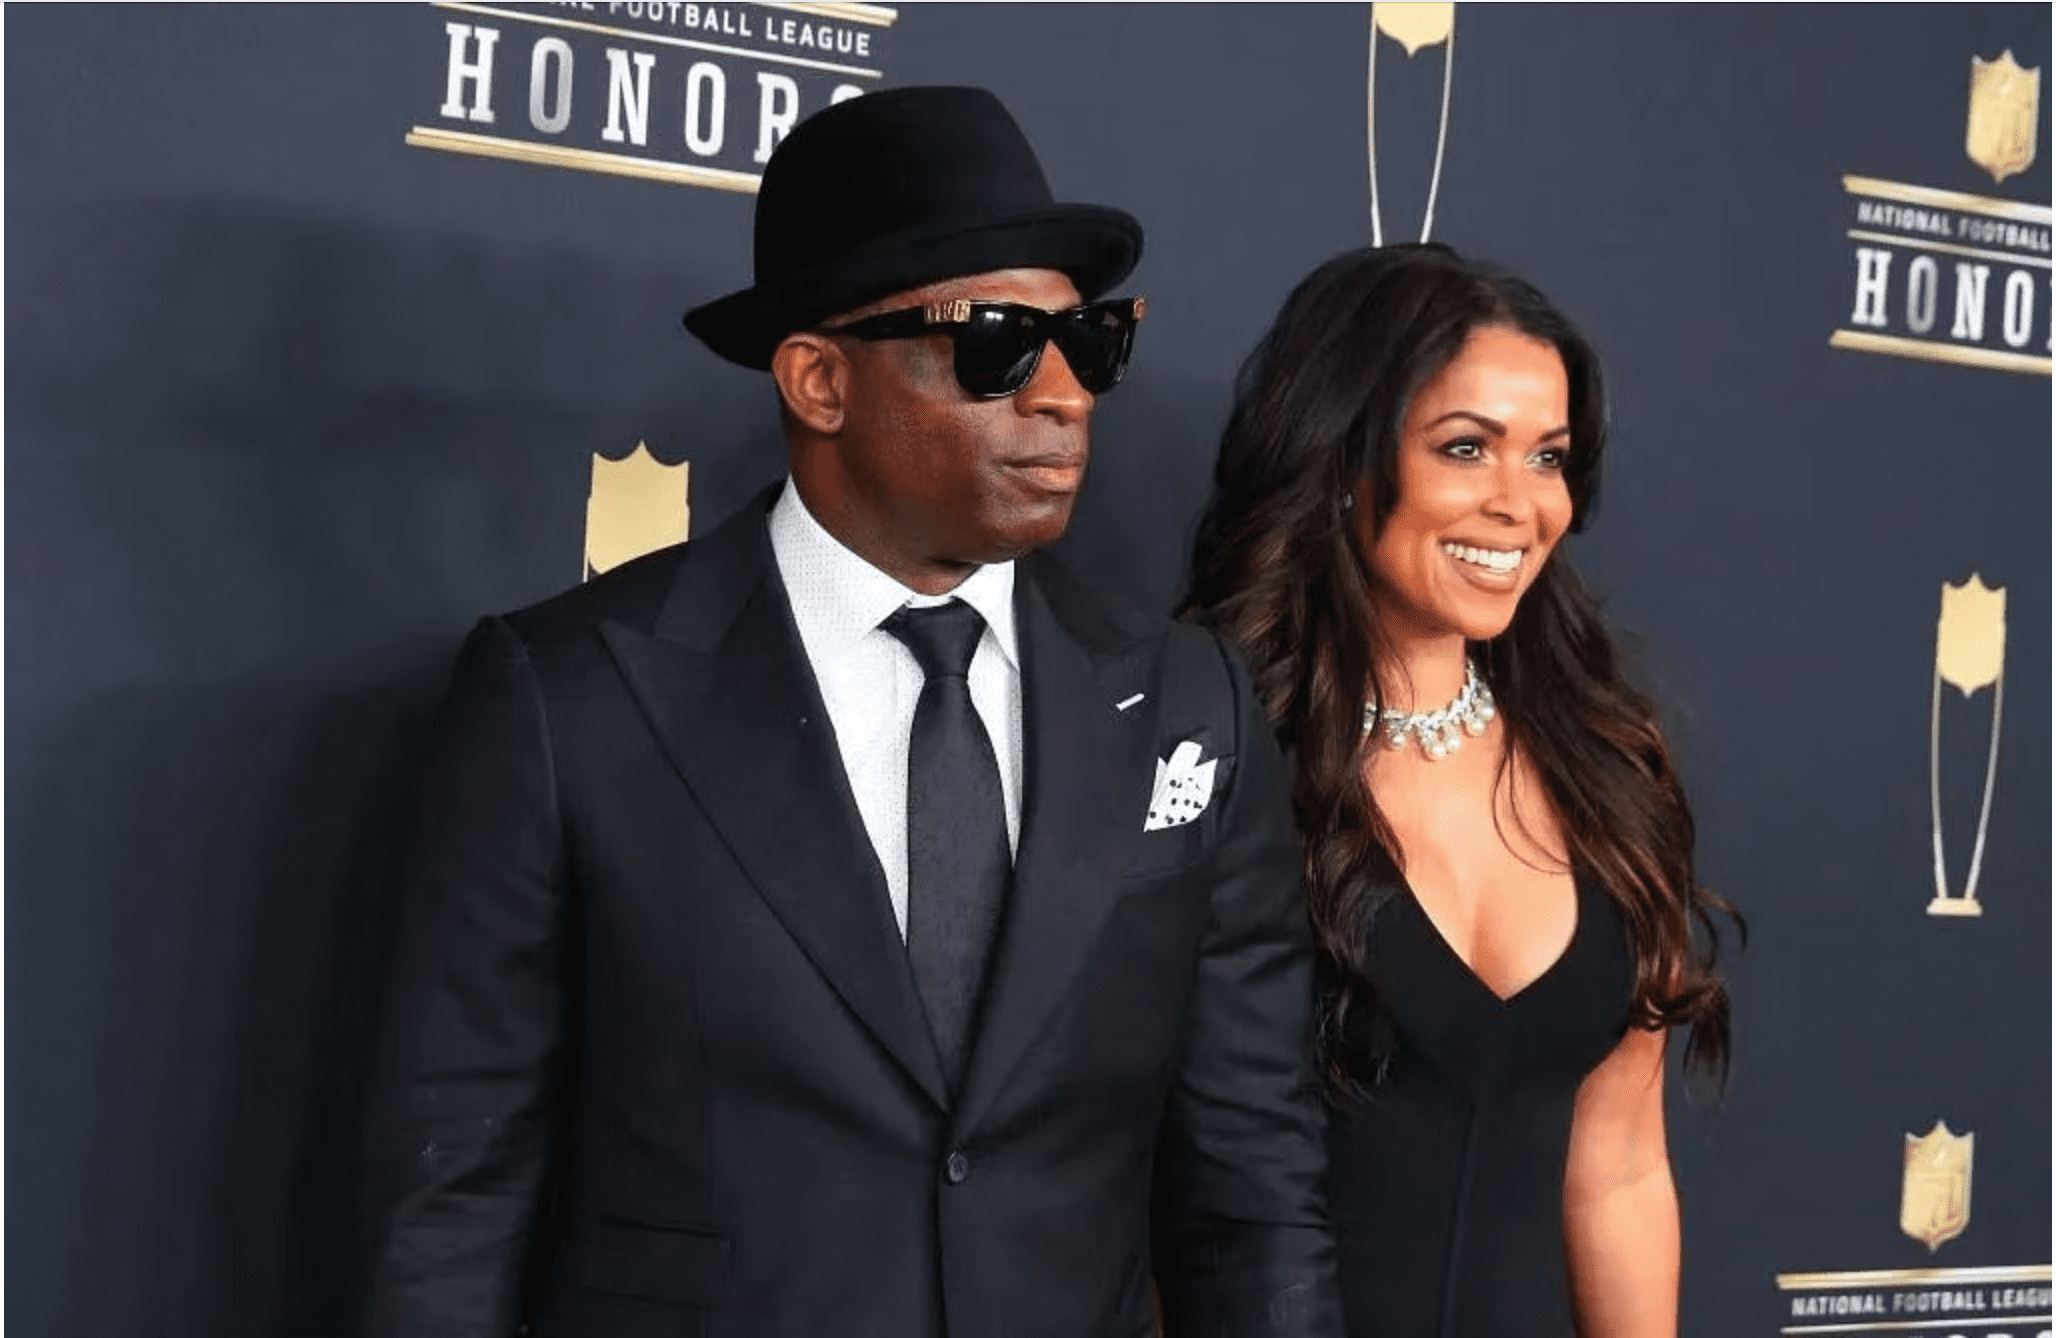 Deion Sanders net worth, age, wiki, family, biography and latest updates